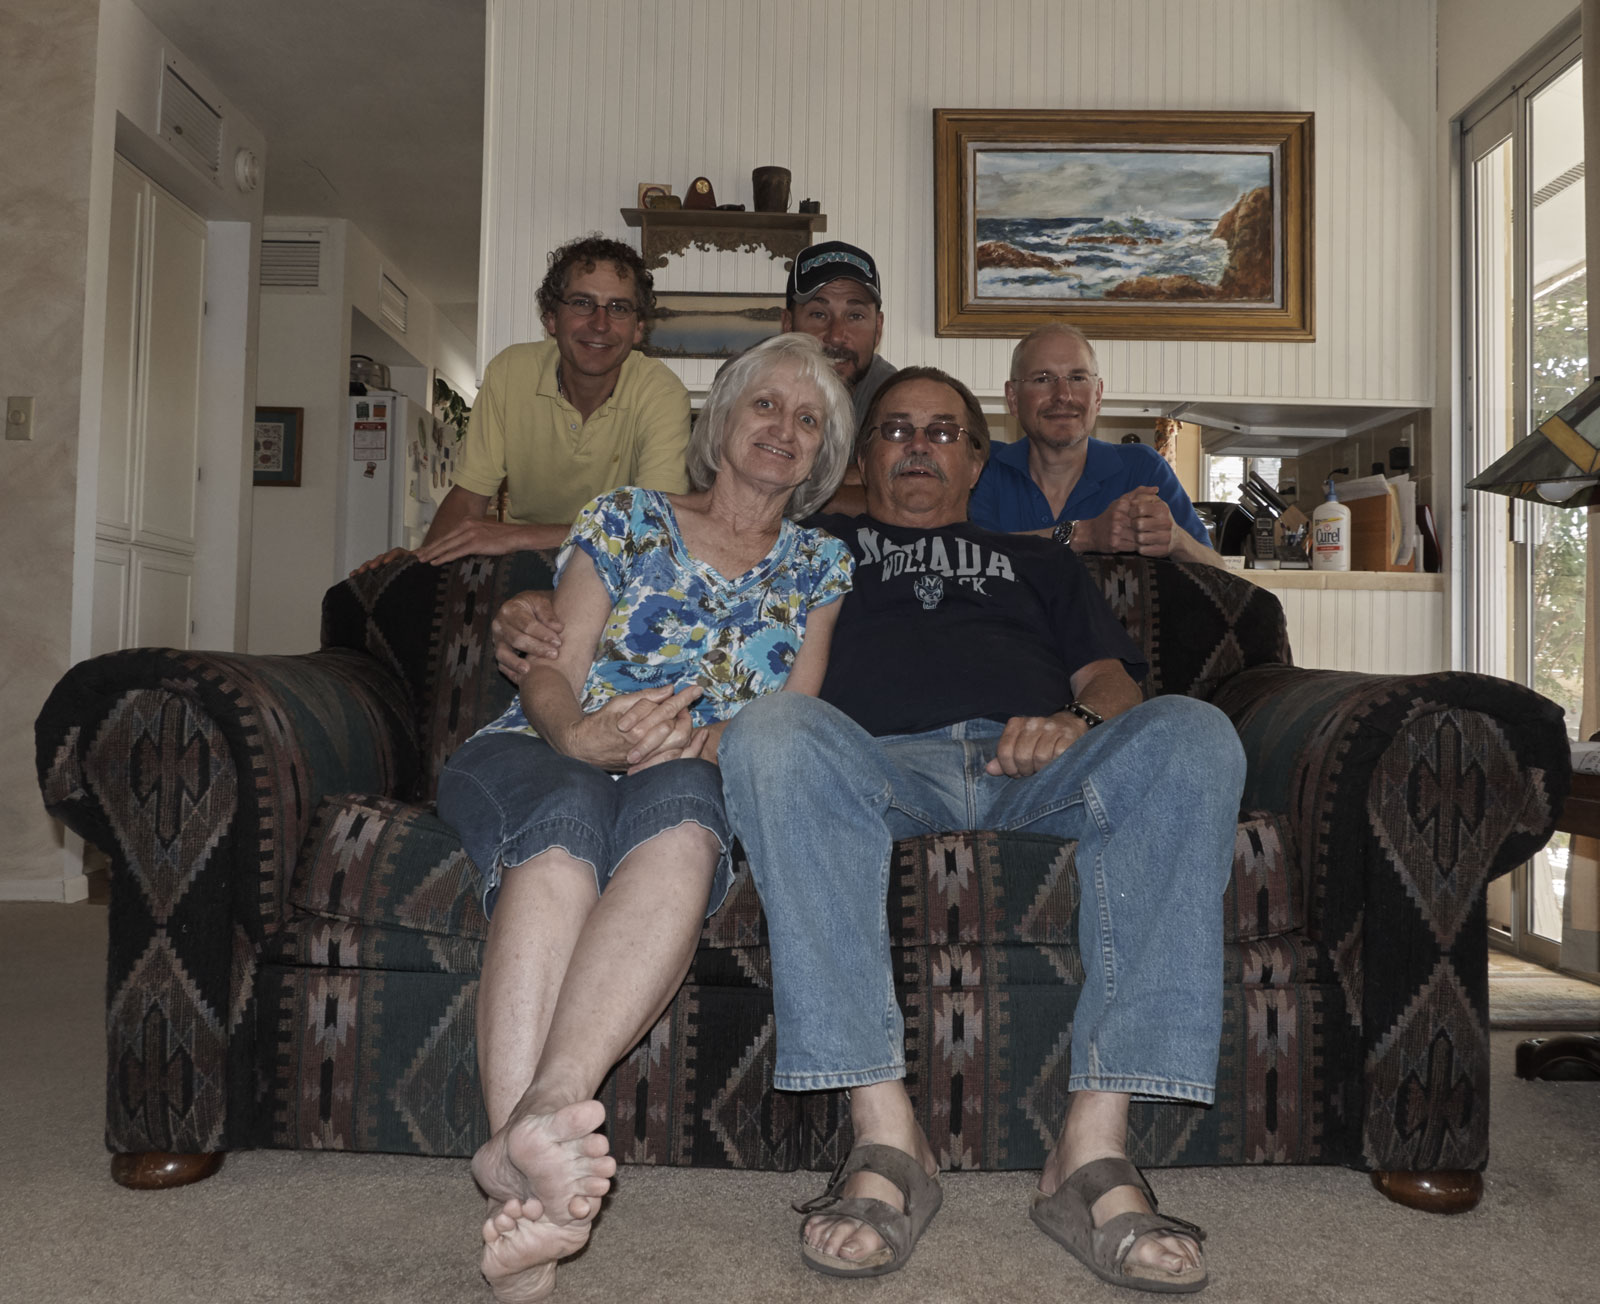 Tom, Lynne, Marc, Uncle Bill, and me in Uncle Bill and Lynne's living room